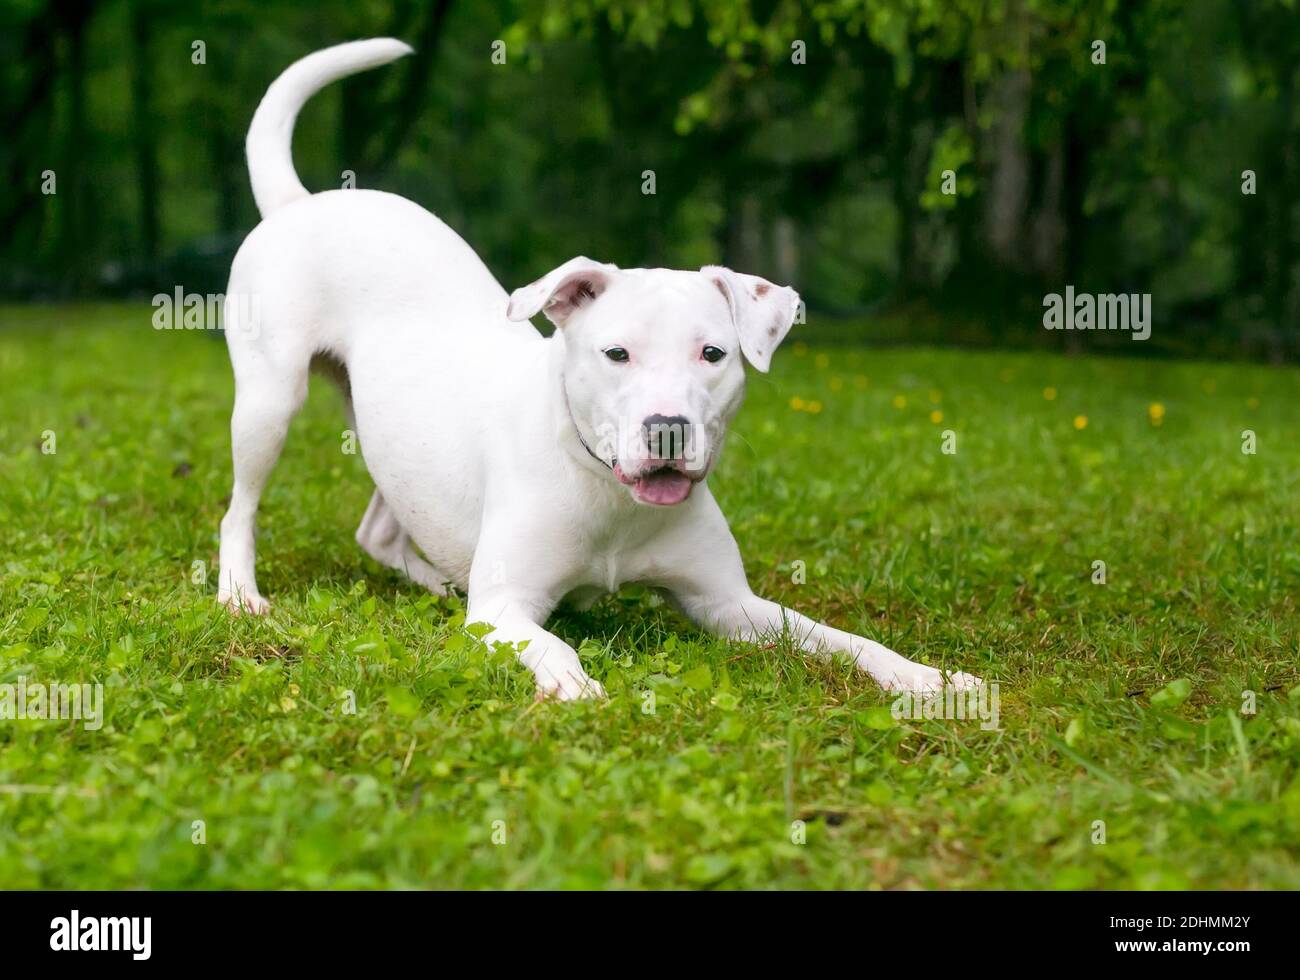 A playful white Retriever x Terrier mixed breed dog in a play bow position Stock Photo